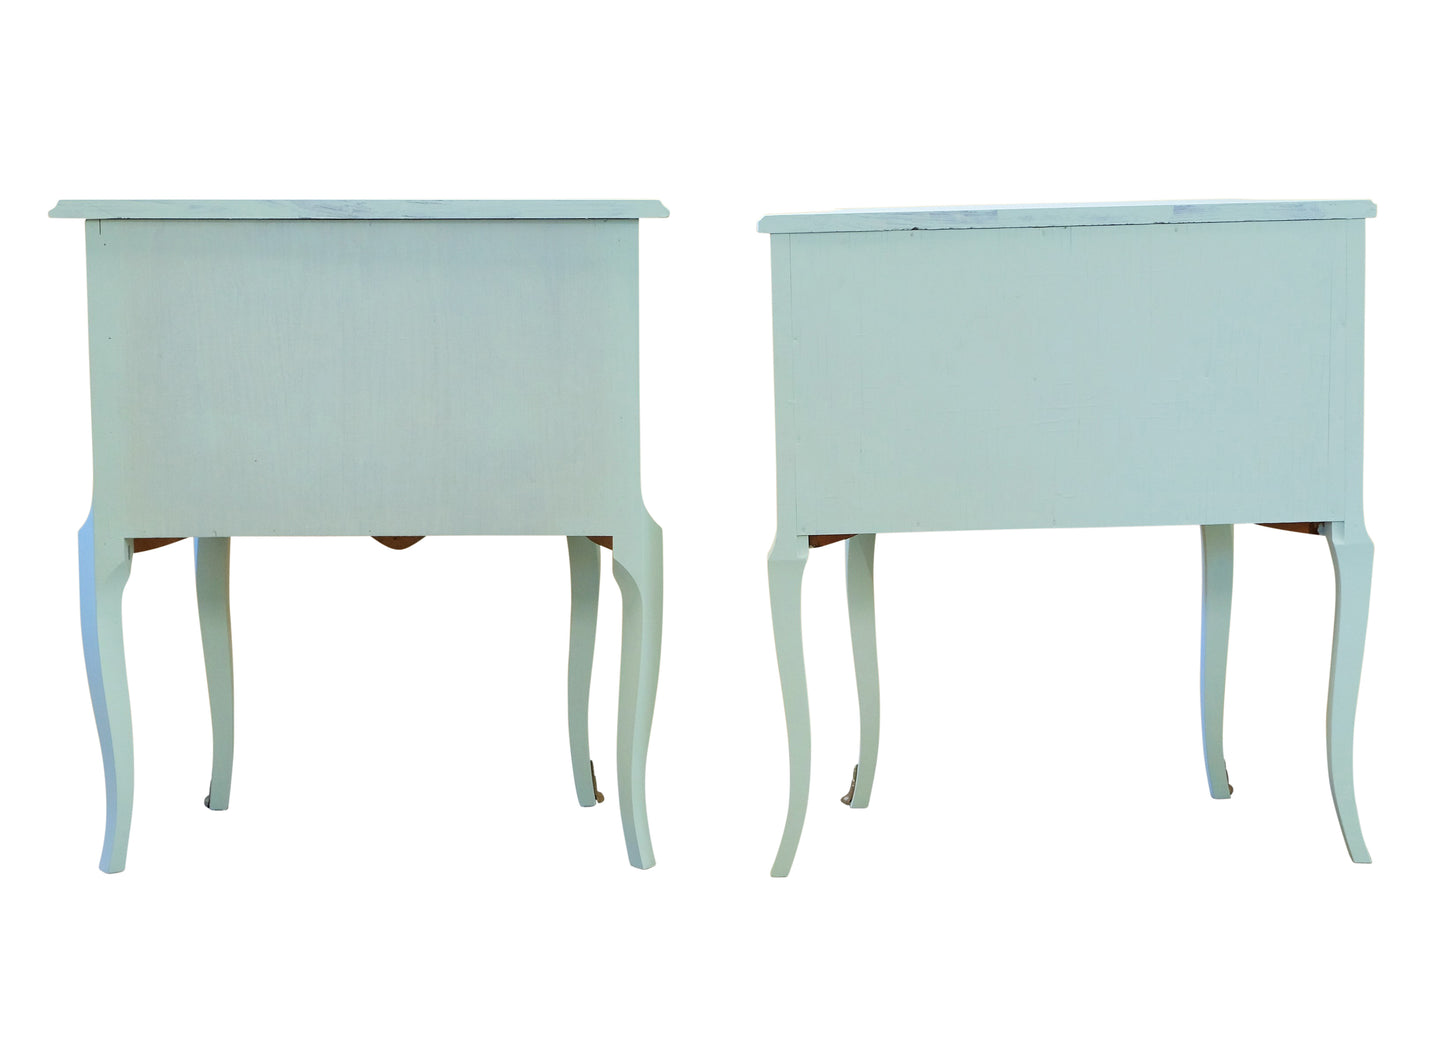 A Pair of Louis XV Style Bedside Tables with Floral Design and Marble Tops